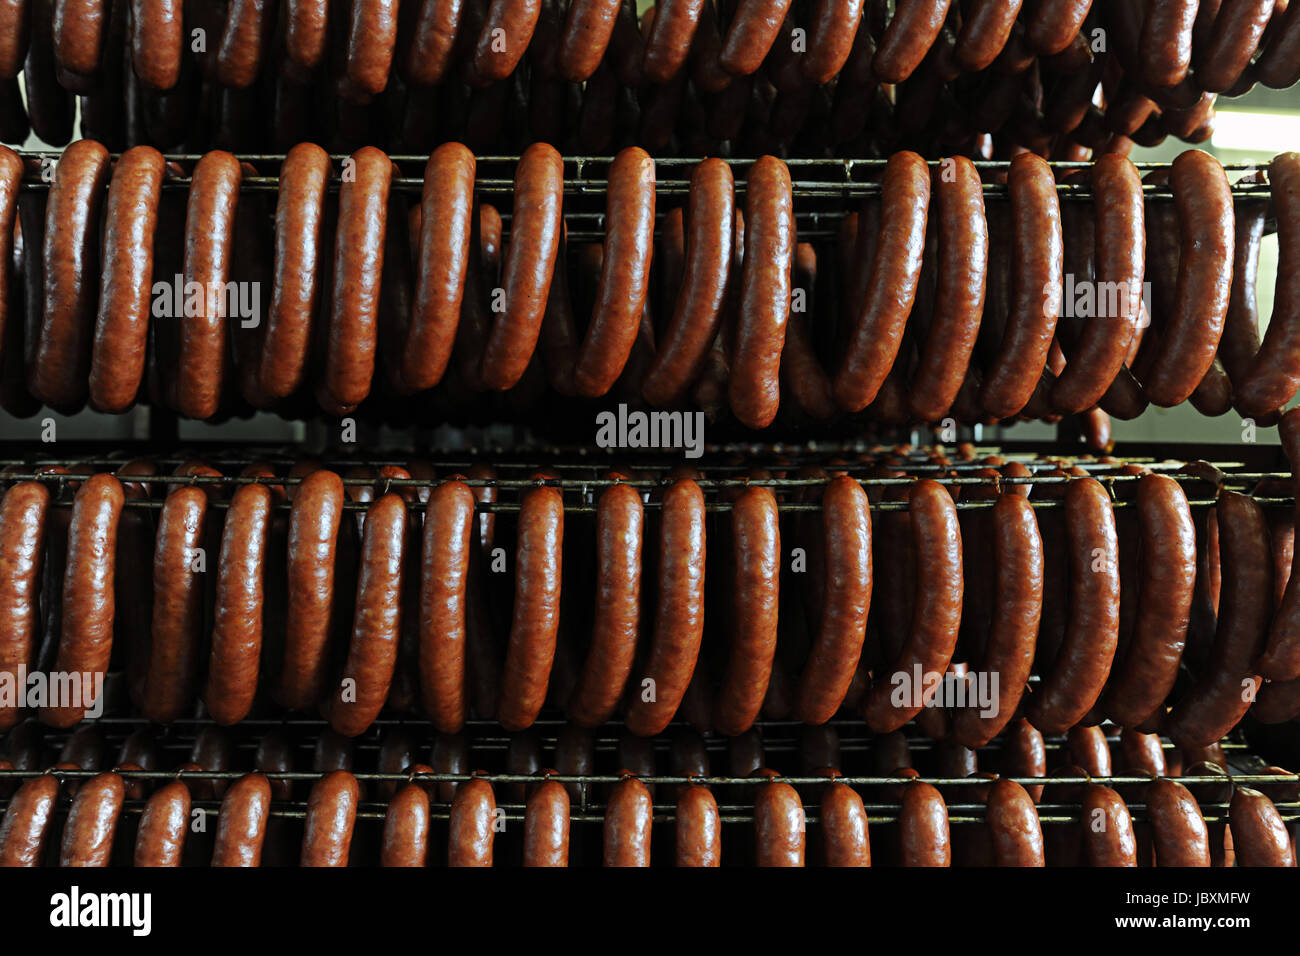 smoked meat at the butchery Stock Photo